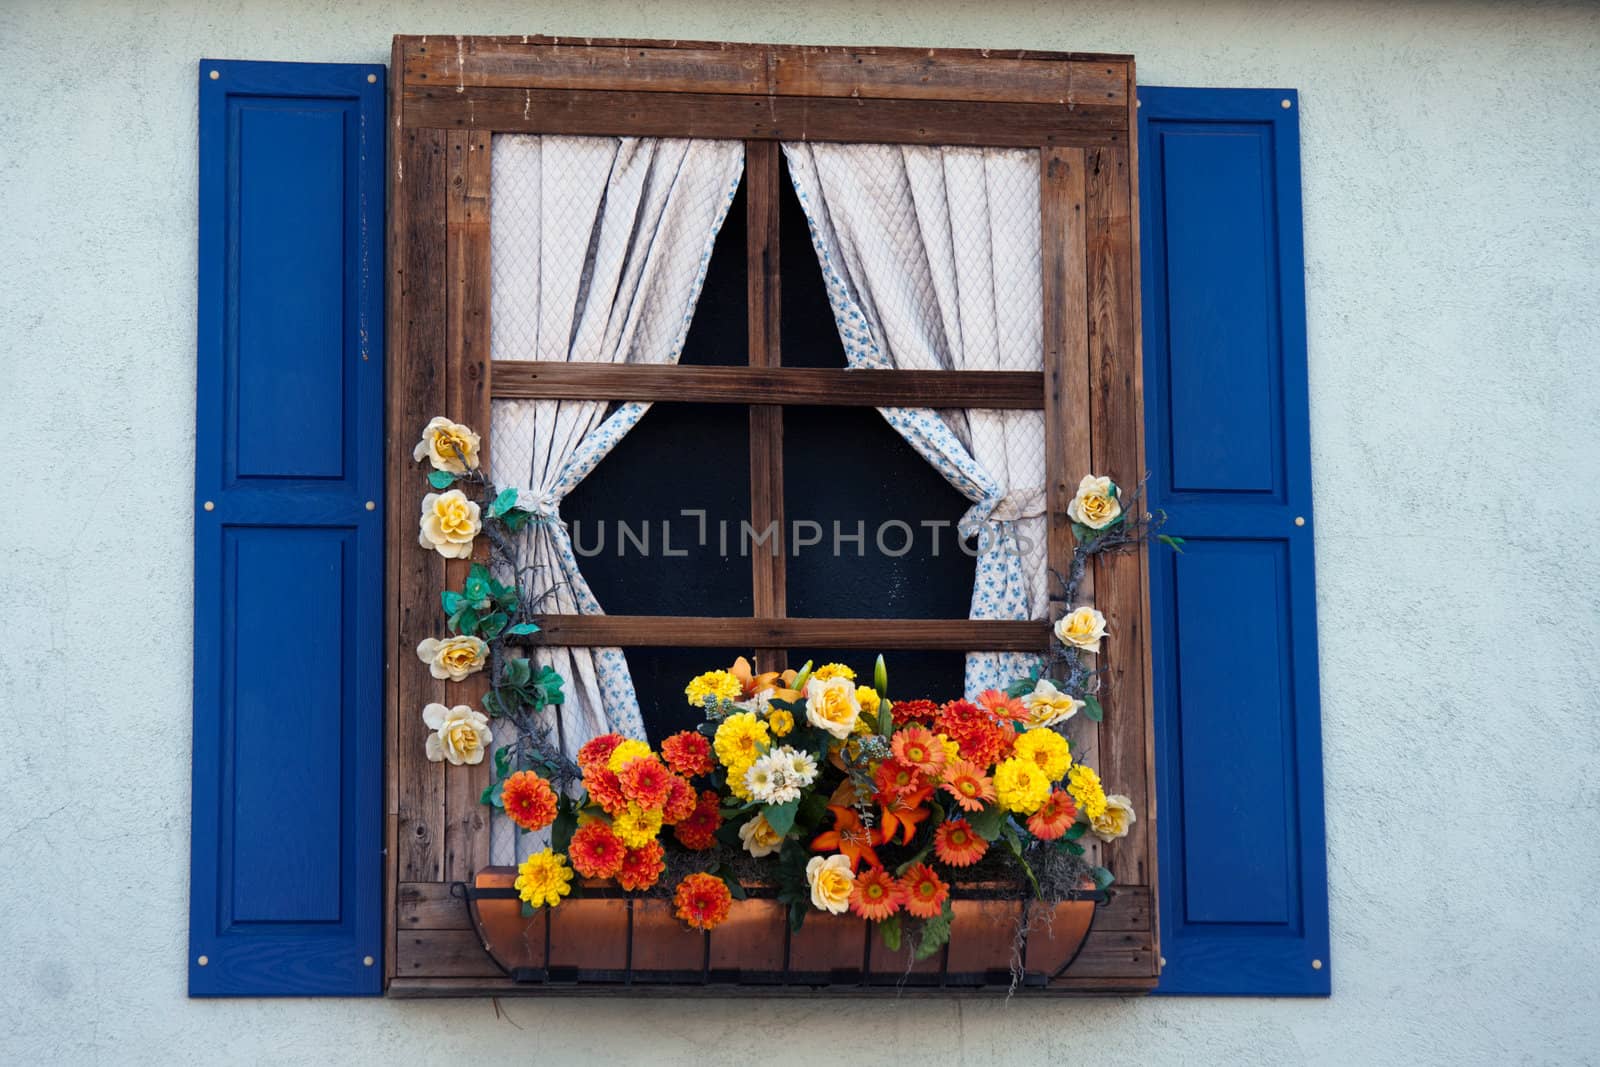 Country style window with flowers,planter, shutters and curtains